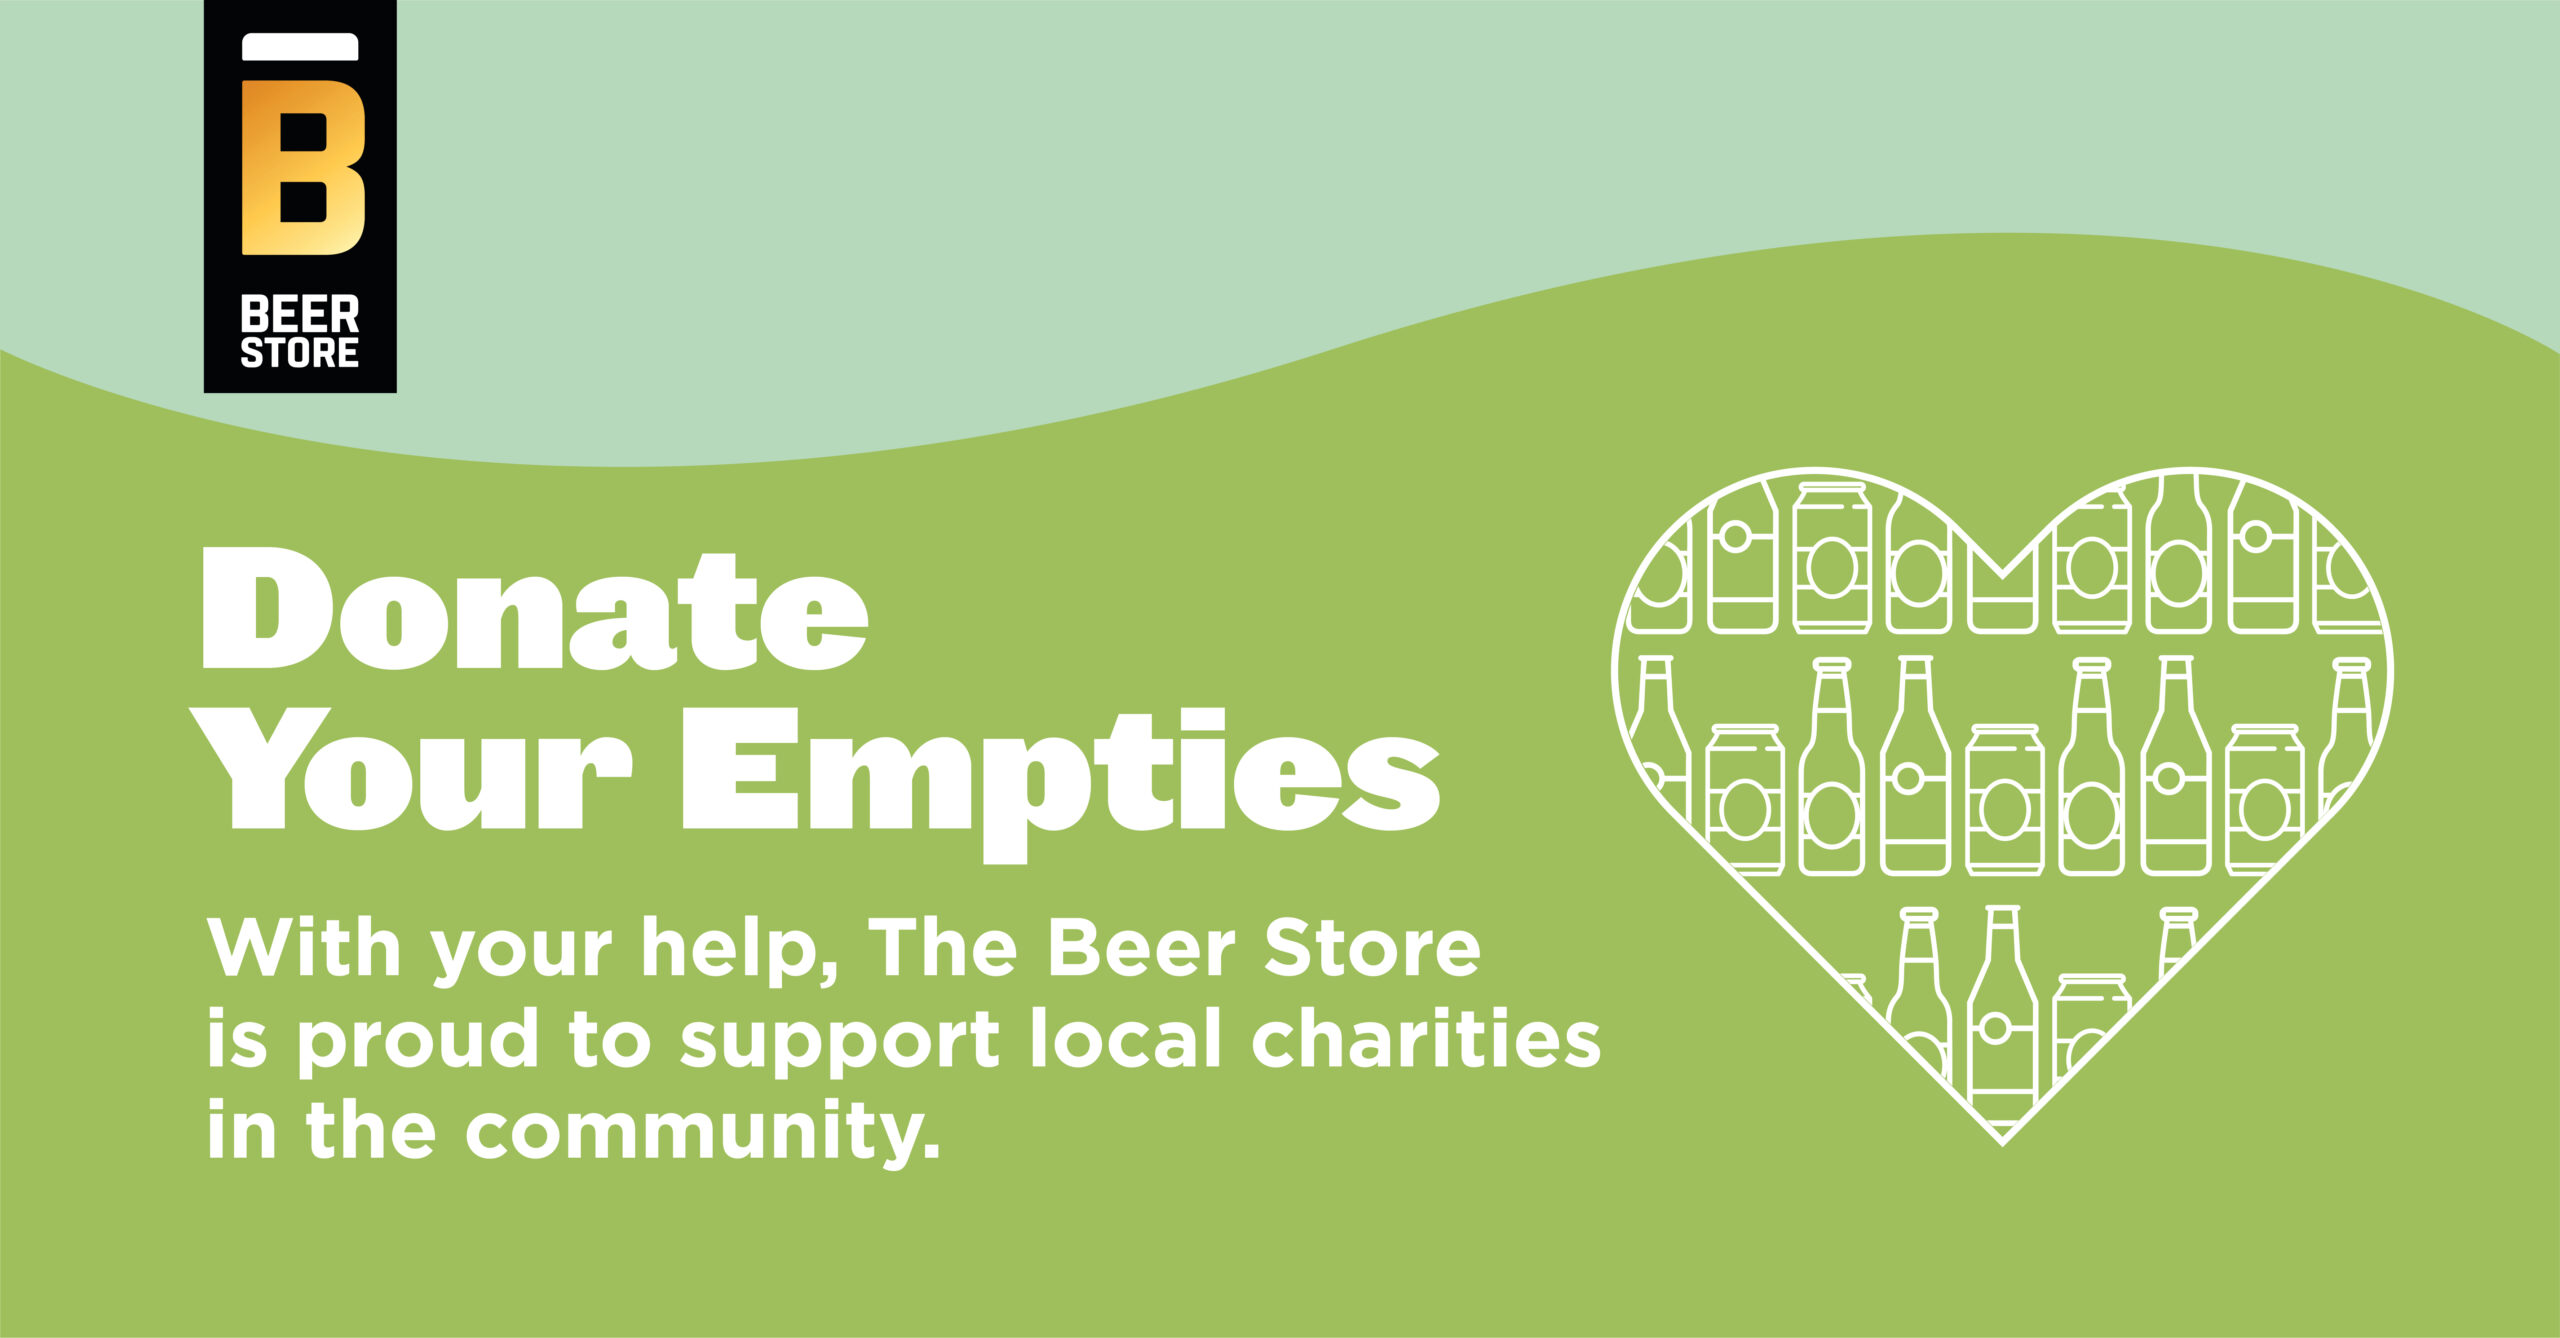 The Beer Store Campaign by Queensway Carlton Foundation Ottawa